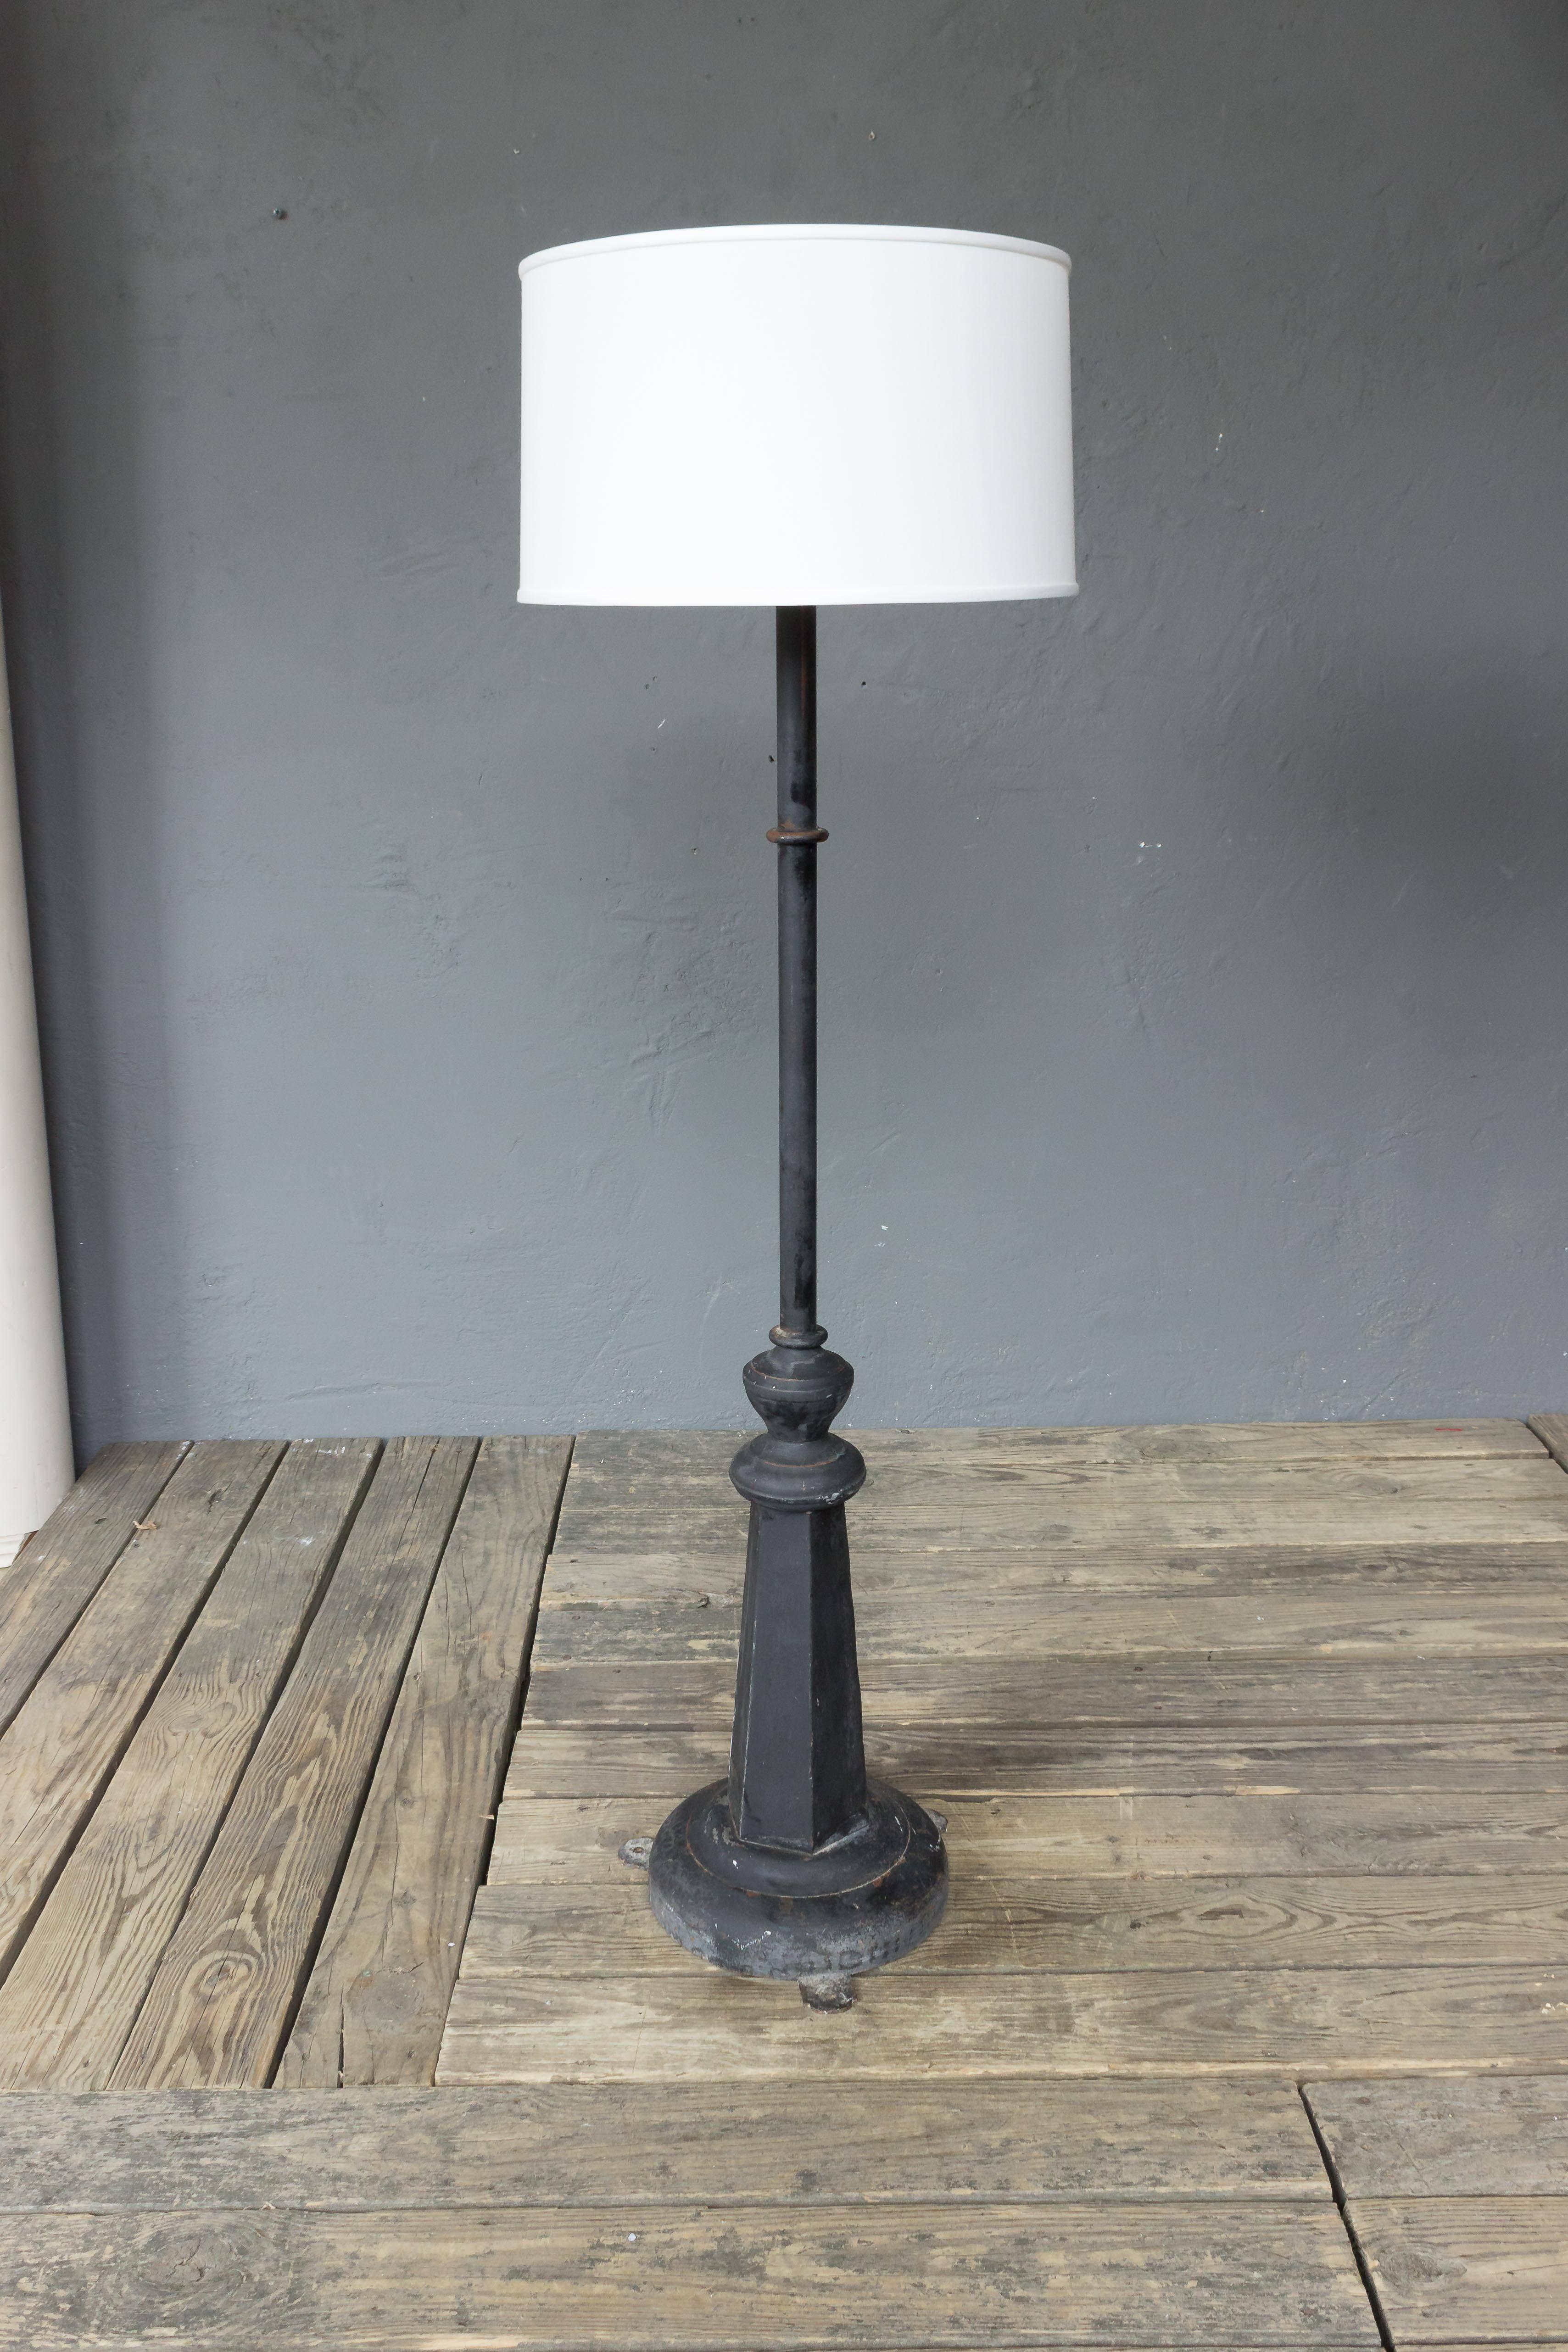 An unusual French floor lamp that was converted from a street or factory lamp. Made of metal, and the base is heavy iron, and can be attached to the floor. The floor lamp can also be fitted with a lantern for exterior use. There are three available.